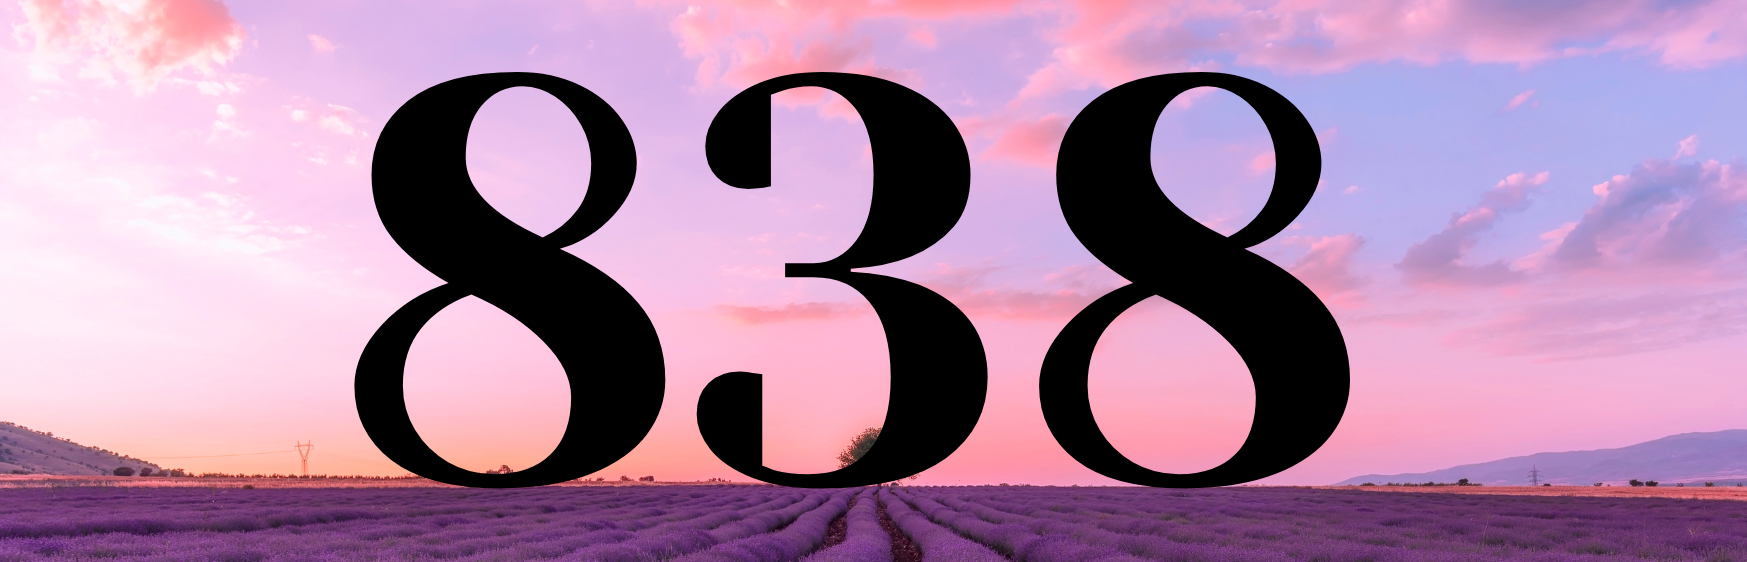 How is witnessing the 838 angel number associated with morality?